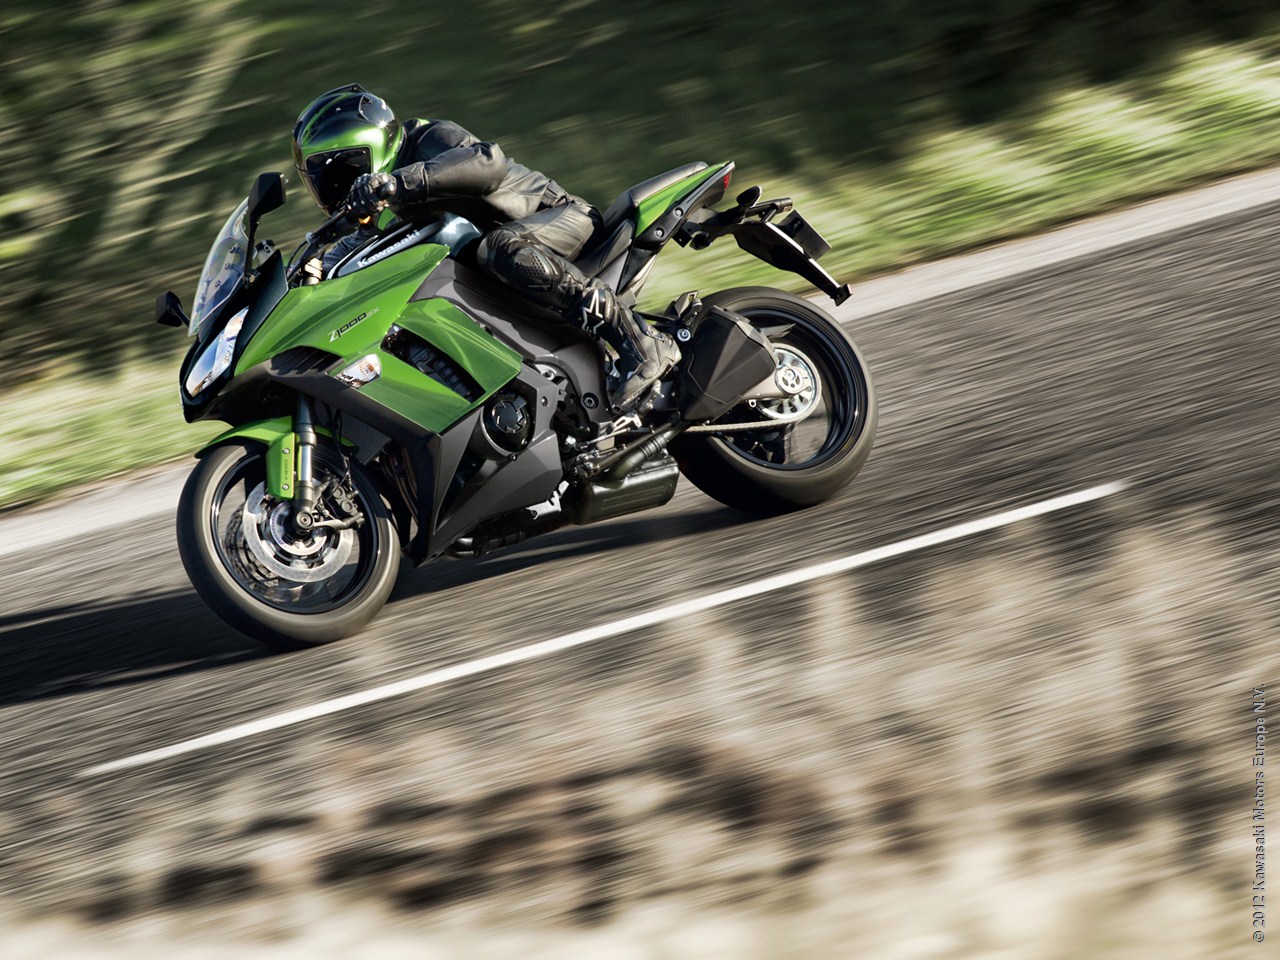 The Best Motorcycles to Buy Now | Sport touring, Yamaha 